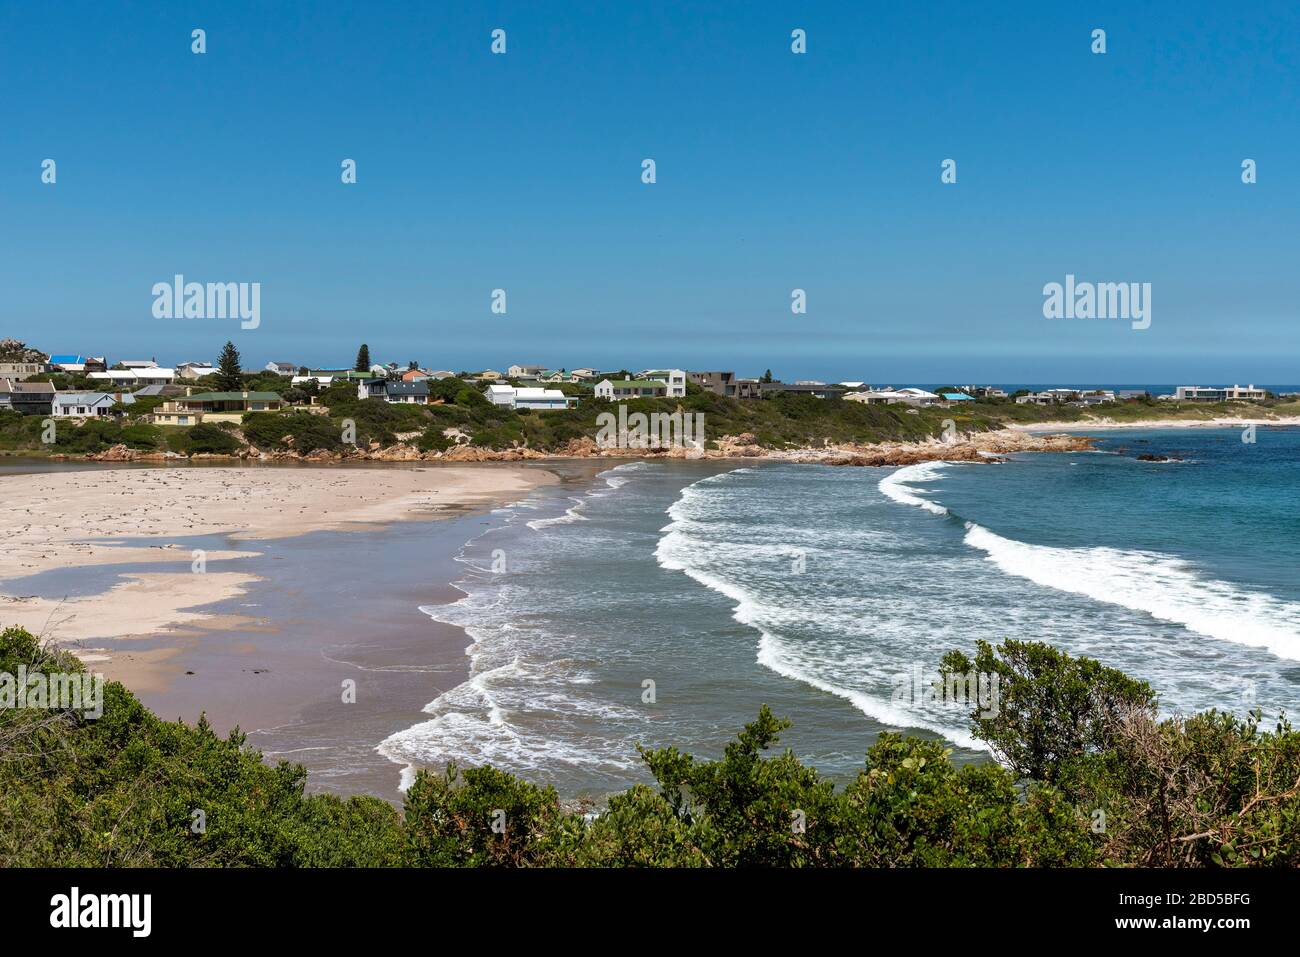 Rooiels Western Cape, South Africa. 2019. Rooi Els a small seaside development off Clarence Drive a scenic highway in the Overberg region. South Afric Stock Photo